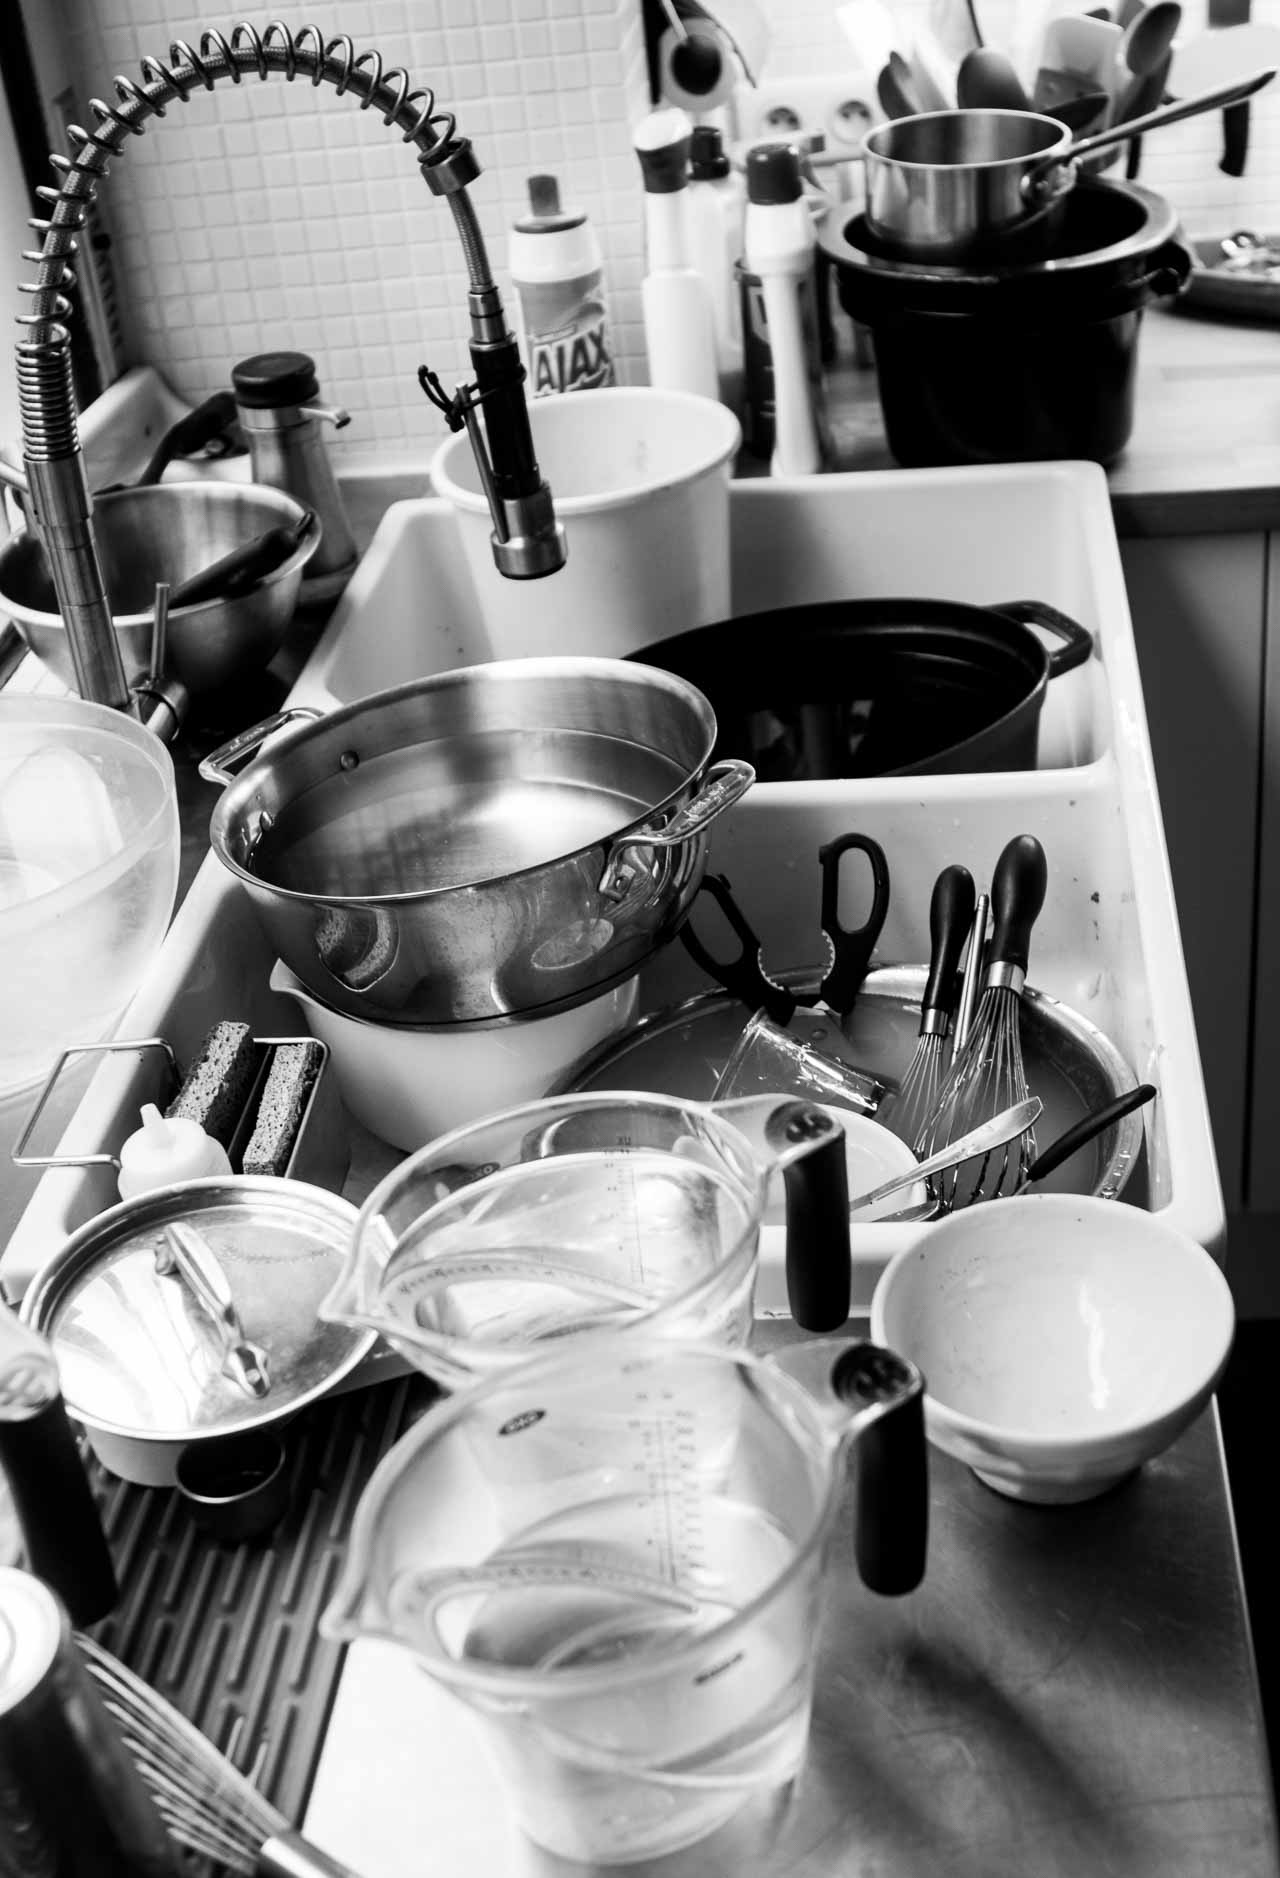 Must-Have Kitchen Gadgets - The Sister Project Blog